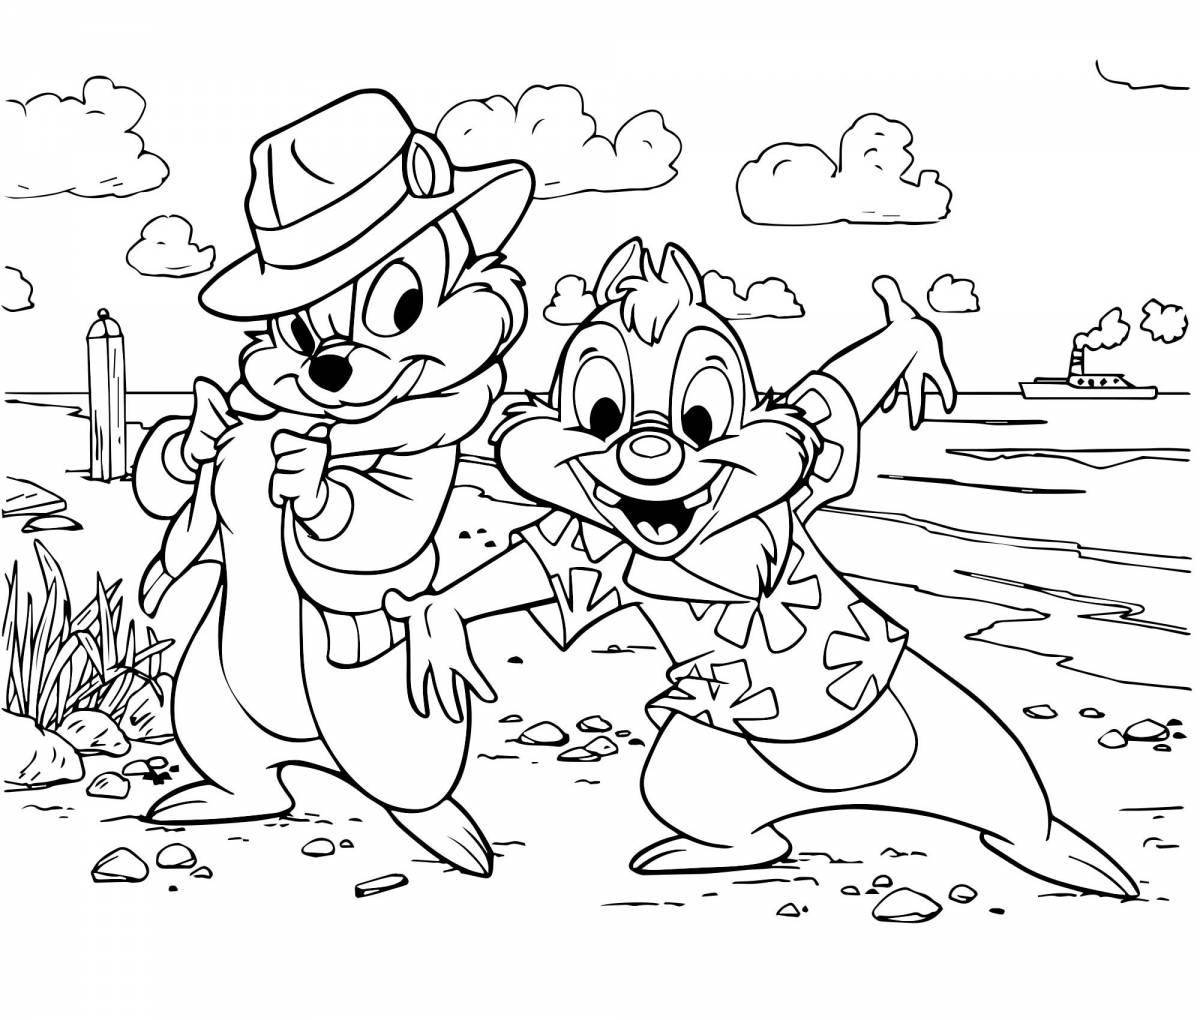 Sparkling coloring page format